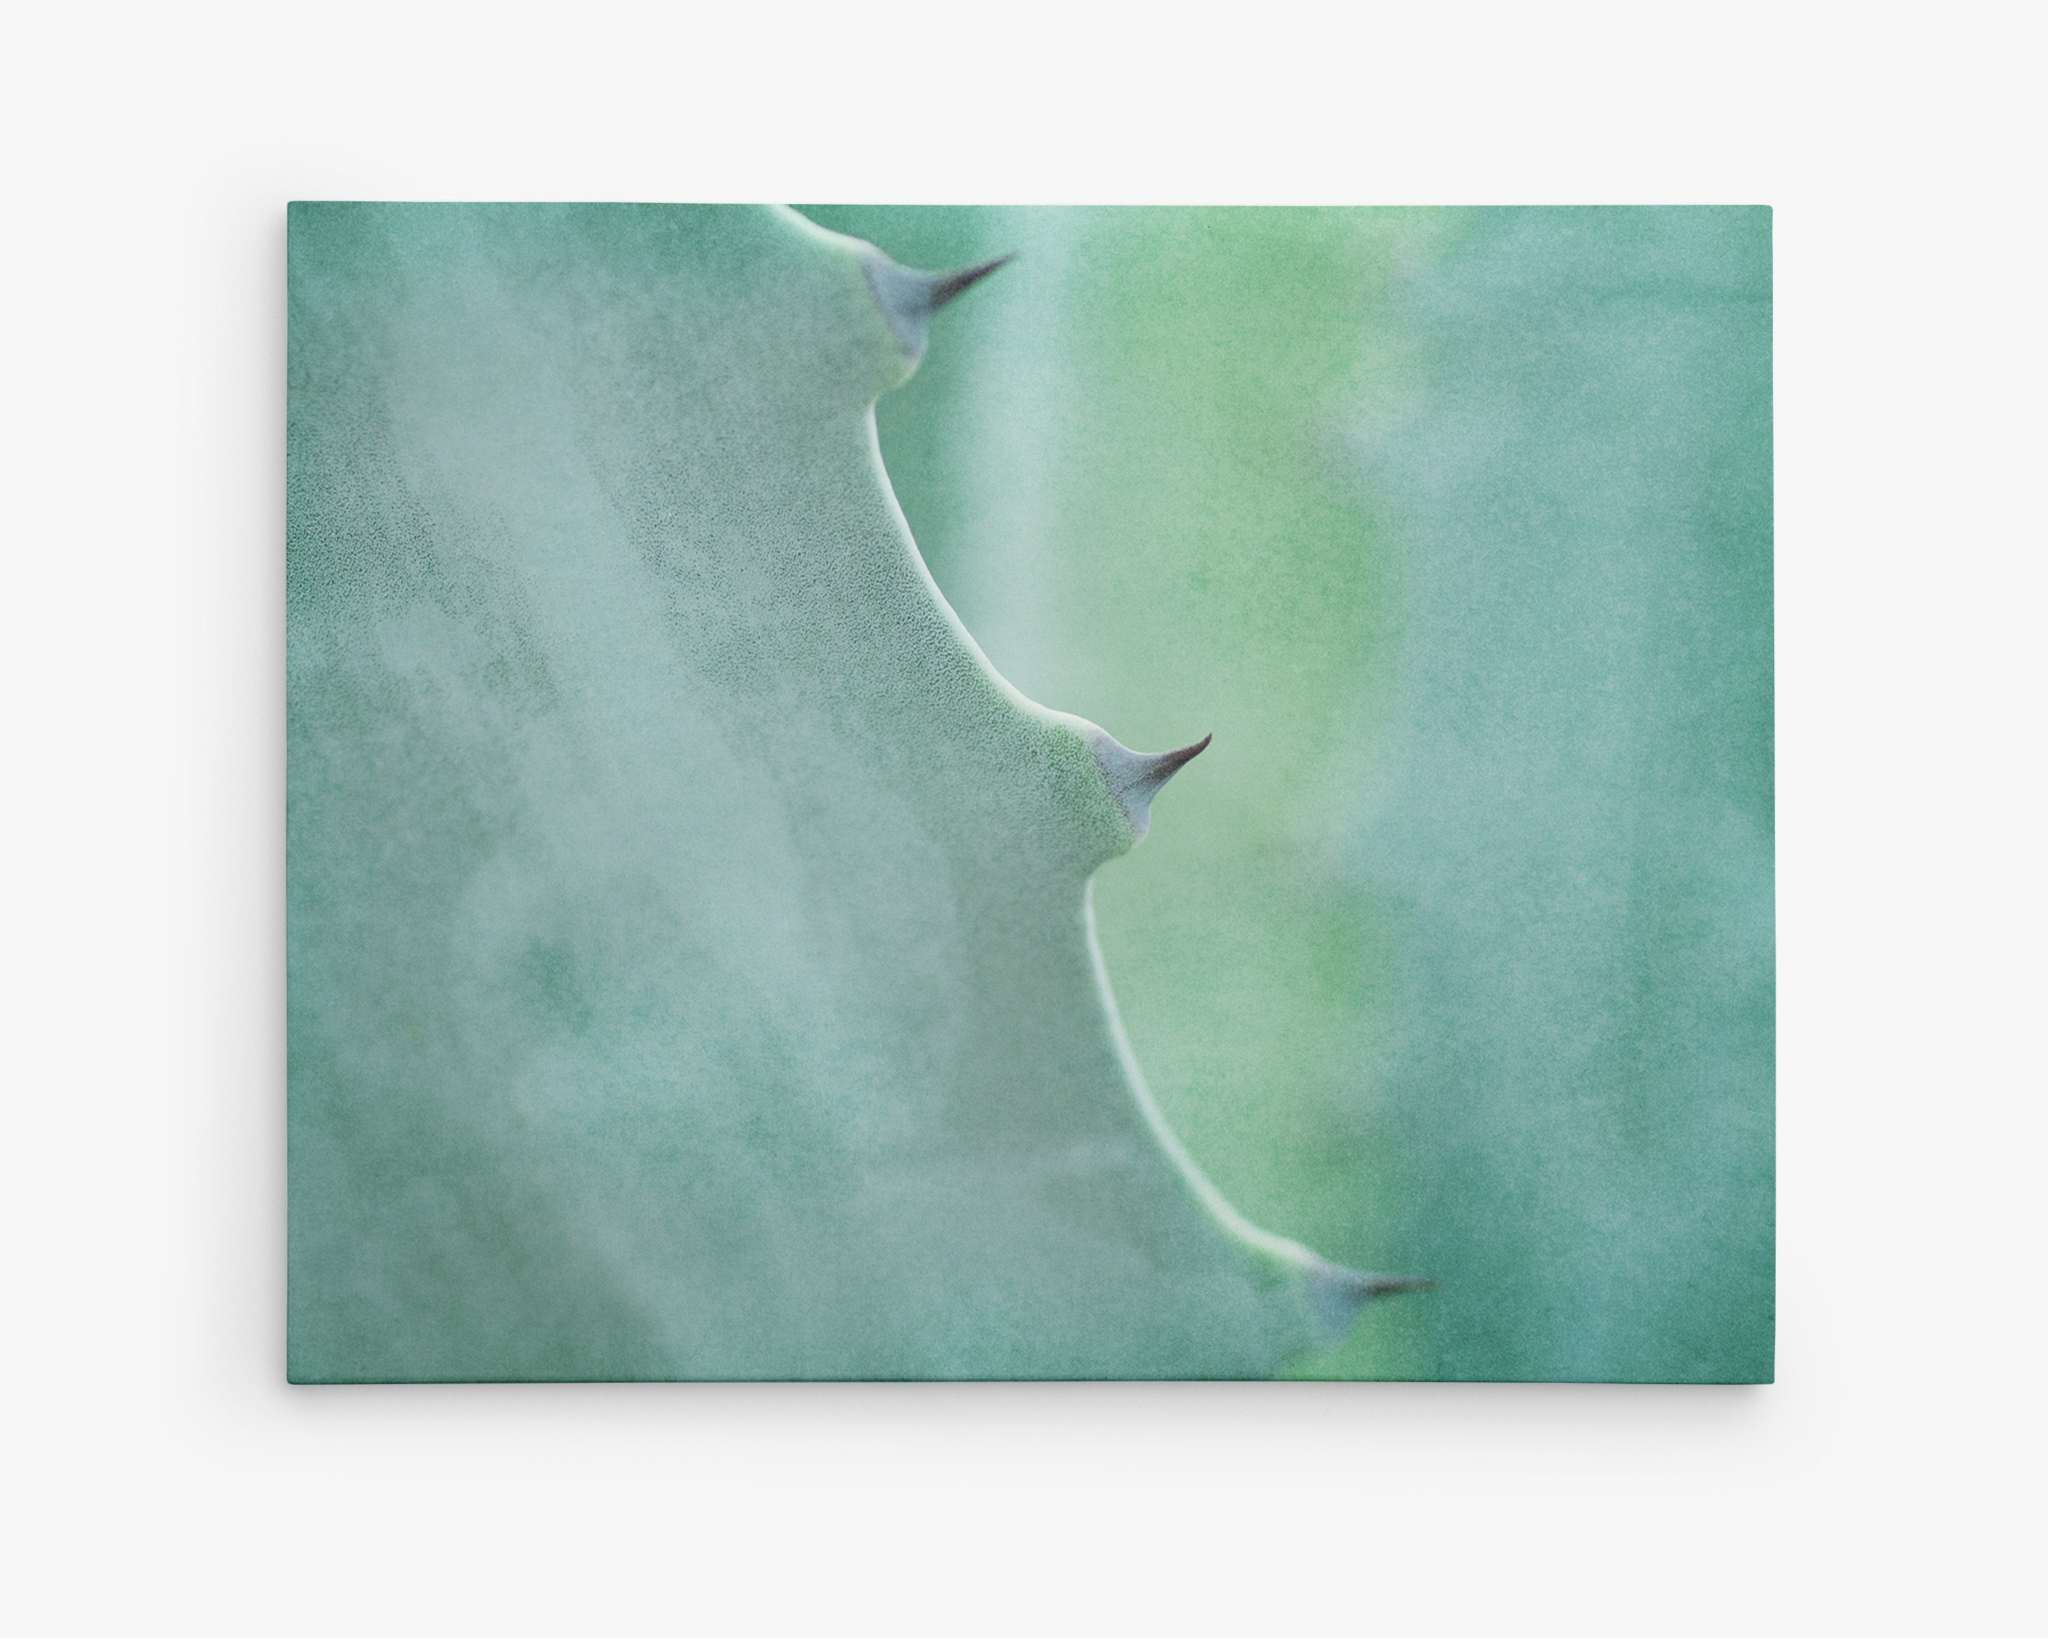 Close-up image of a green Aloe Vera plant showcasing its textured surface and thorny edges. The background is softly blurred, highlighting the intricate details of the plant’s structure as if displayed on a premium artist-grade canvas, Mint Green Botanical Wall Art, &#39;Aloe Vera Spikes&#39; by Offley Green.